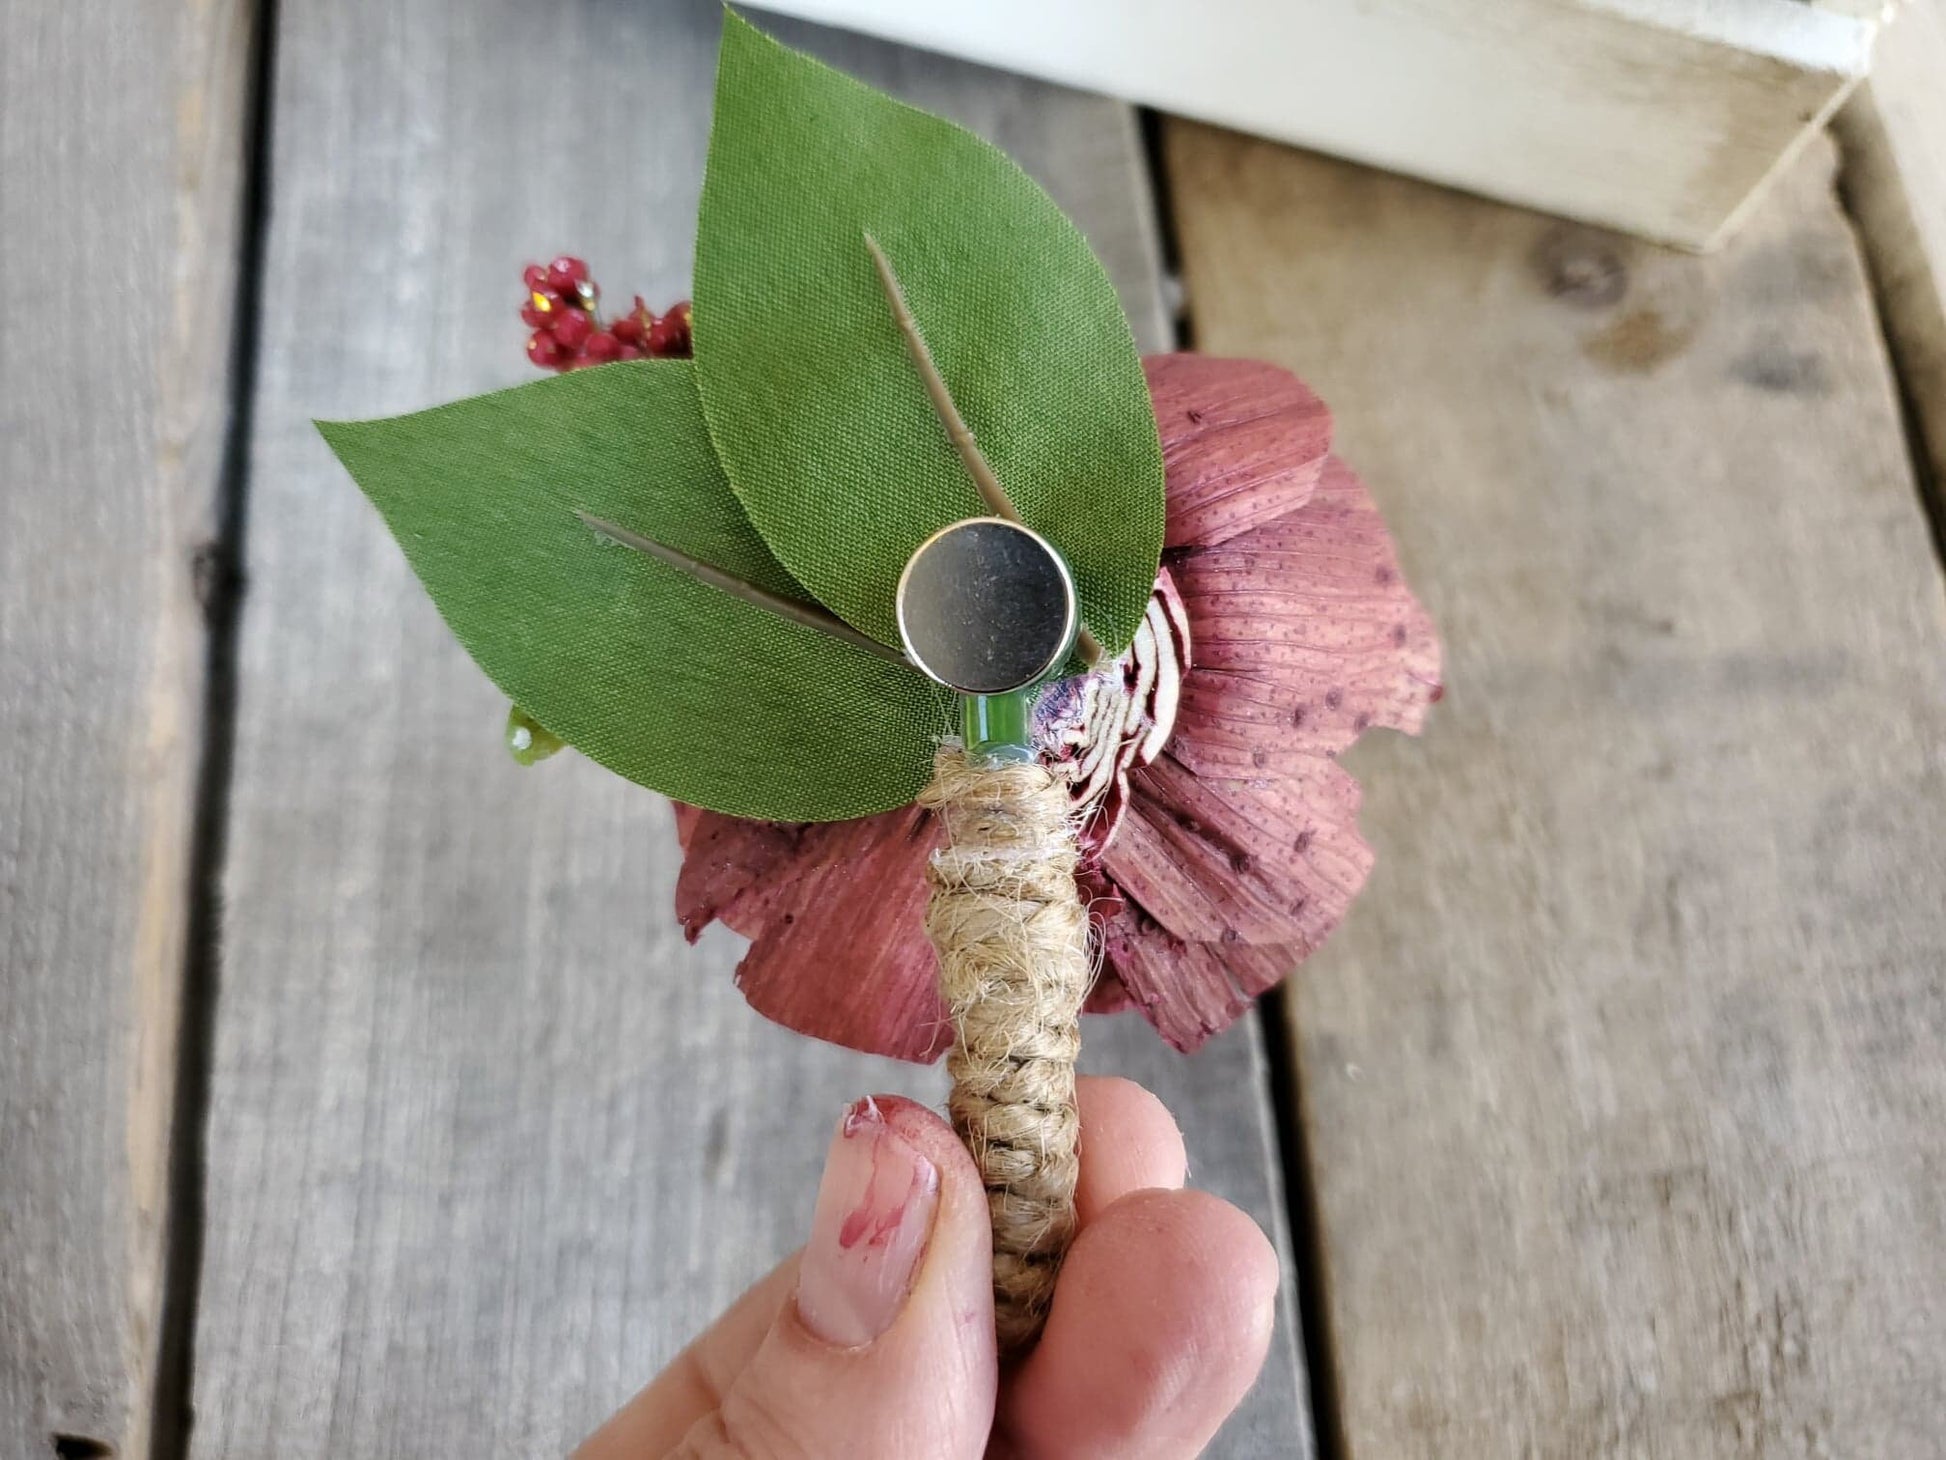 Christmas Wood Flower Boutonniere, Holiday Wedding Flowers, Christmas Wedding Boutonniere, Groom Flower, Lapel Pin, Groomsmen Pinned Flower